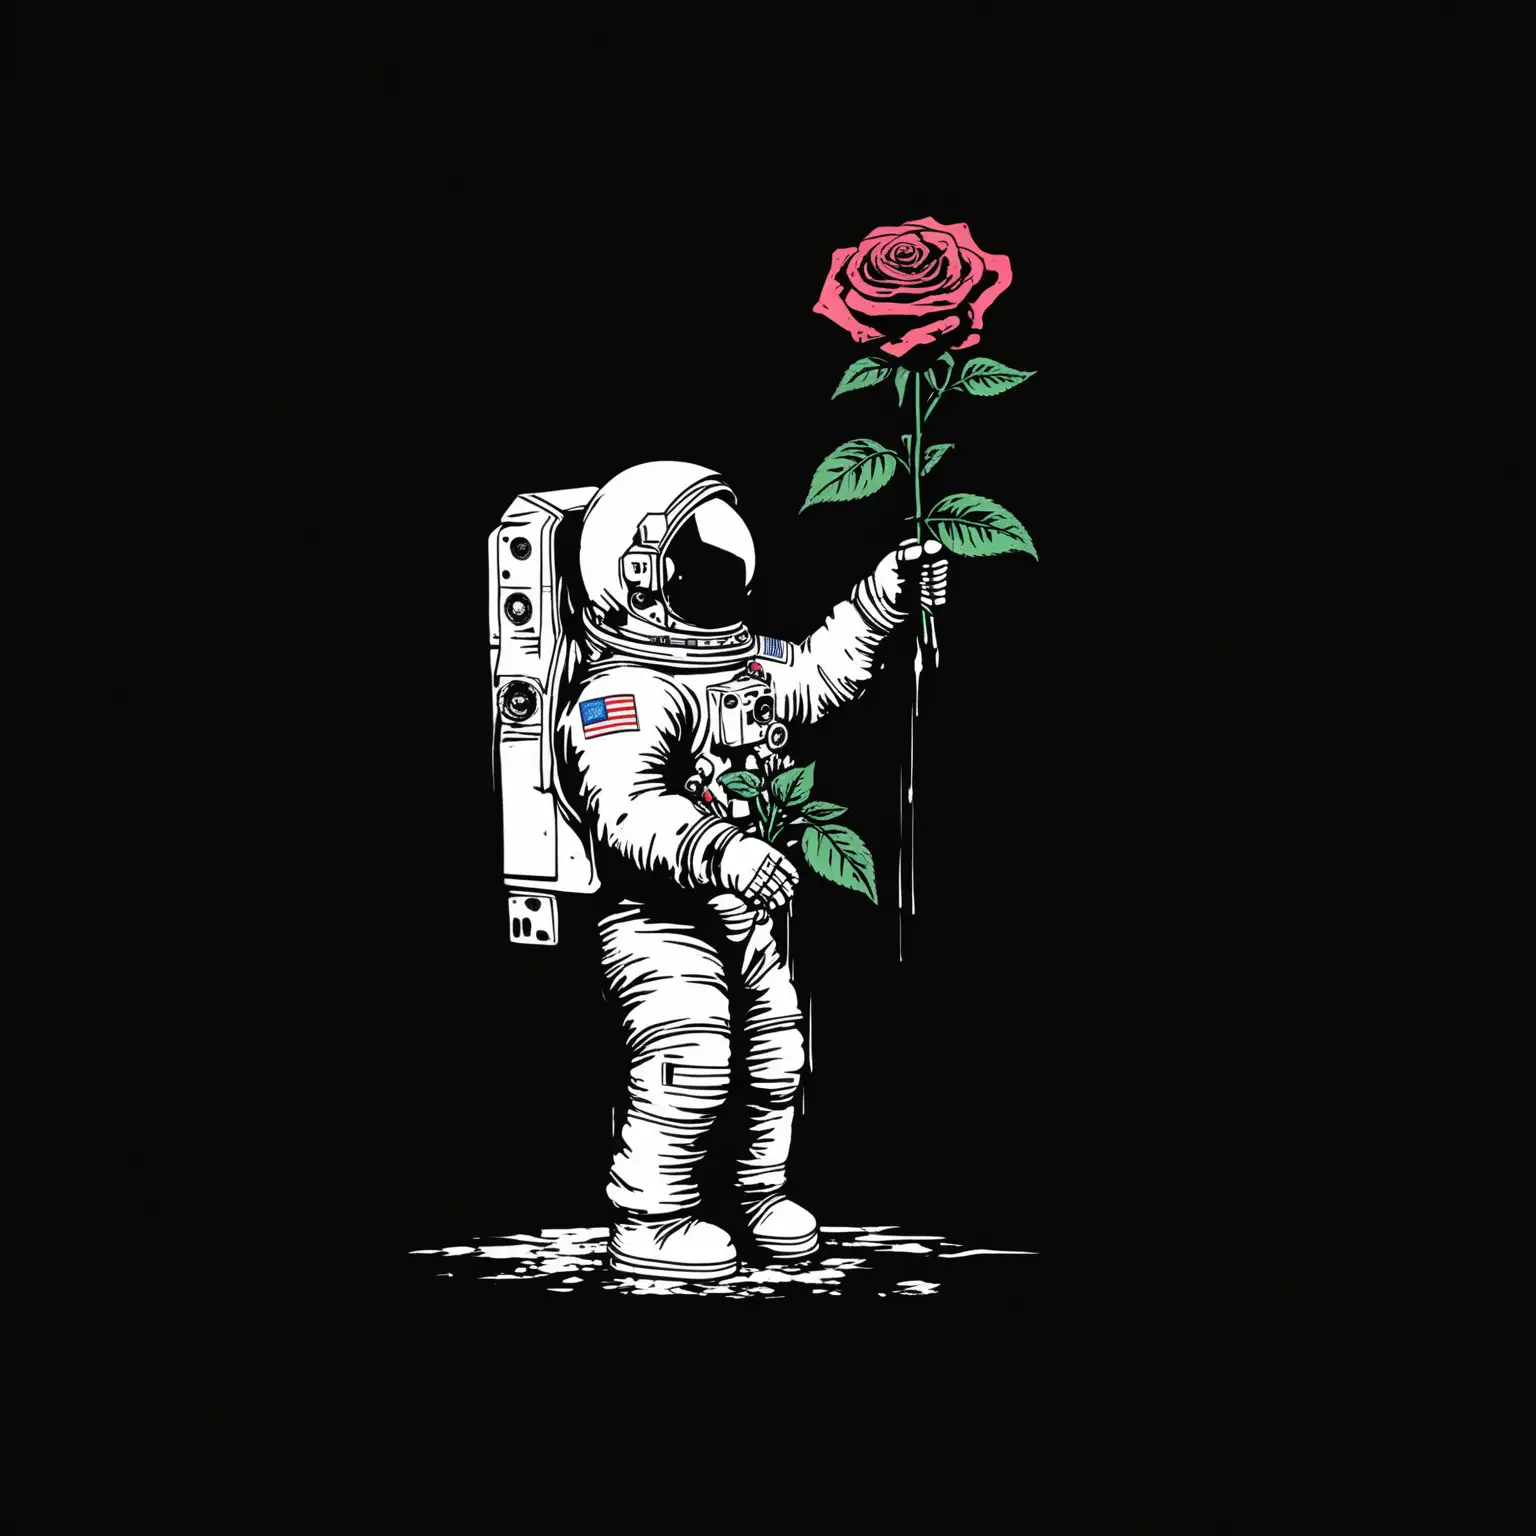 Create a design that is in the style of Banksy street art work. Place it on a flat black background. Include an astronaut holding a rose in the design.